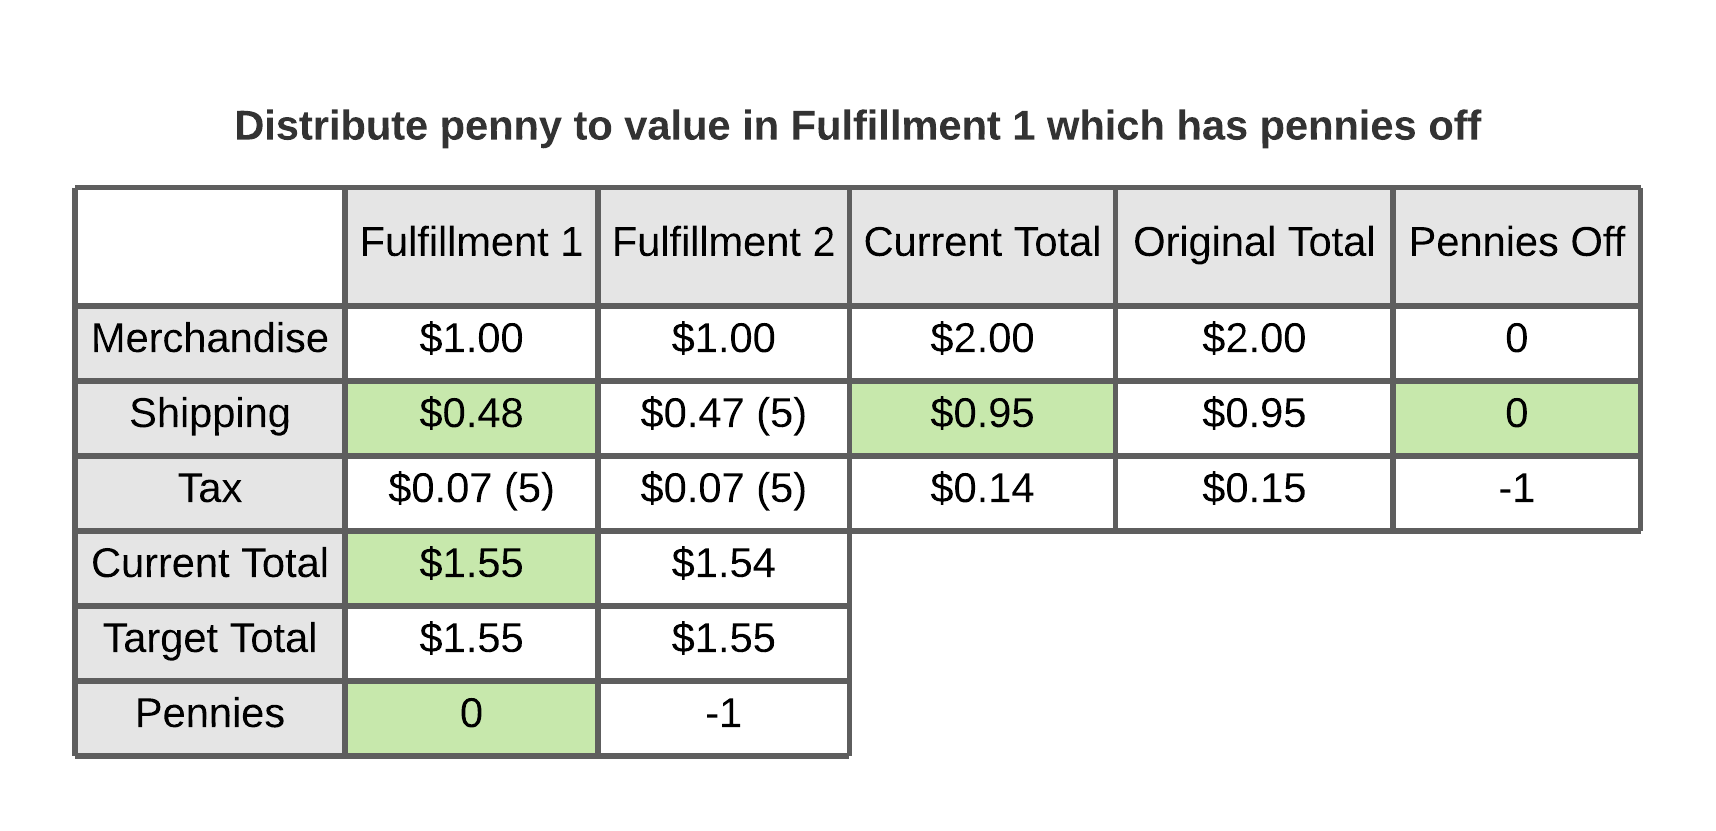 Distribute penny to value in Fulfillment 1 which has pennies off